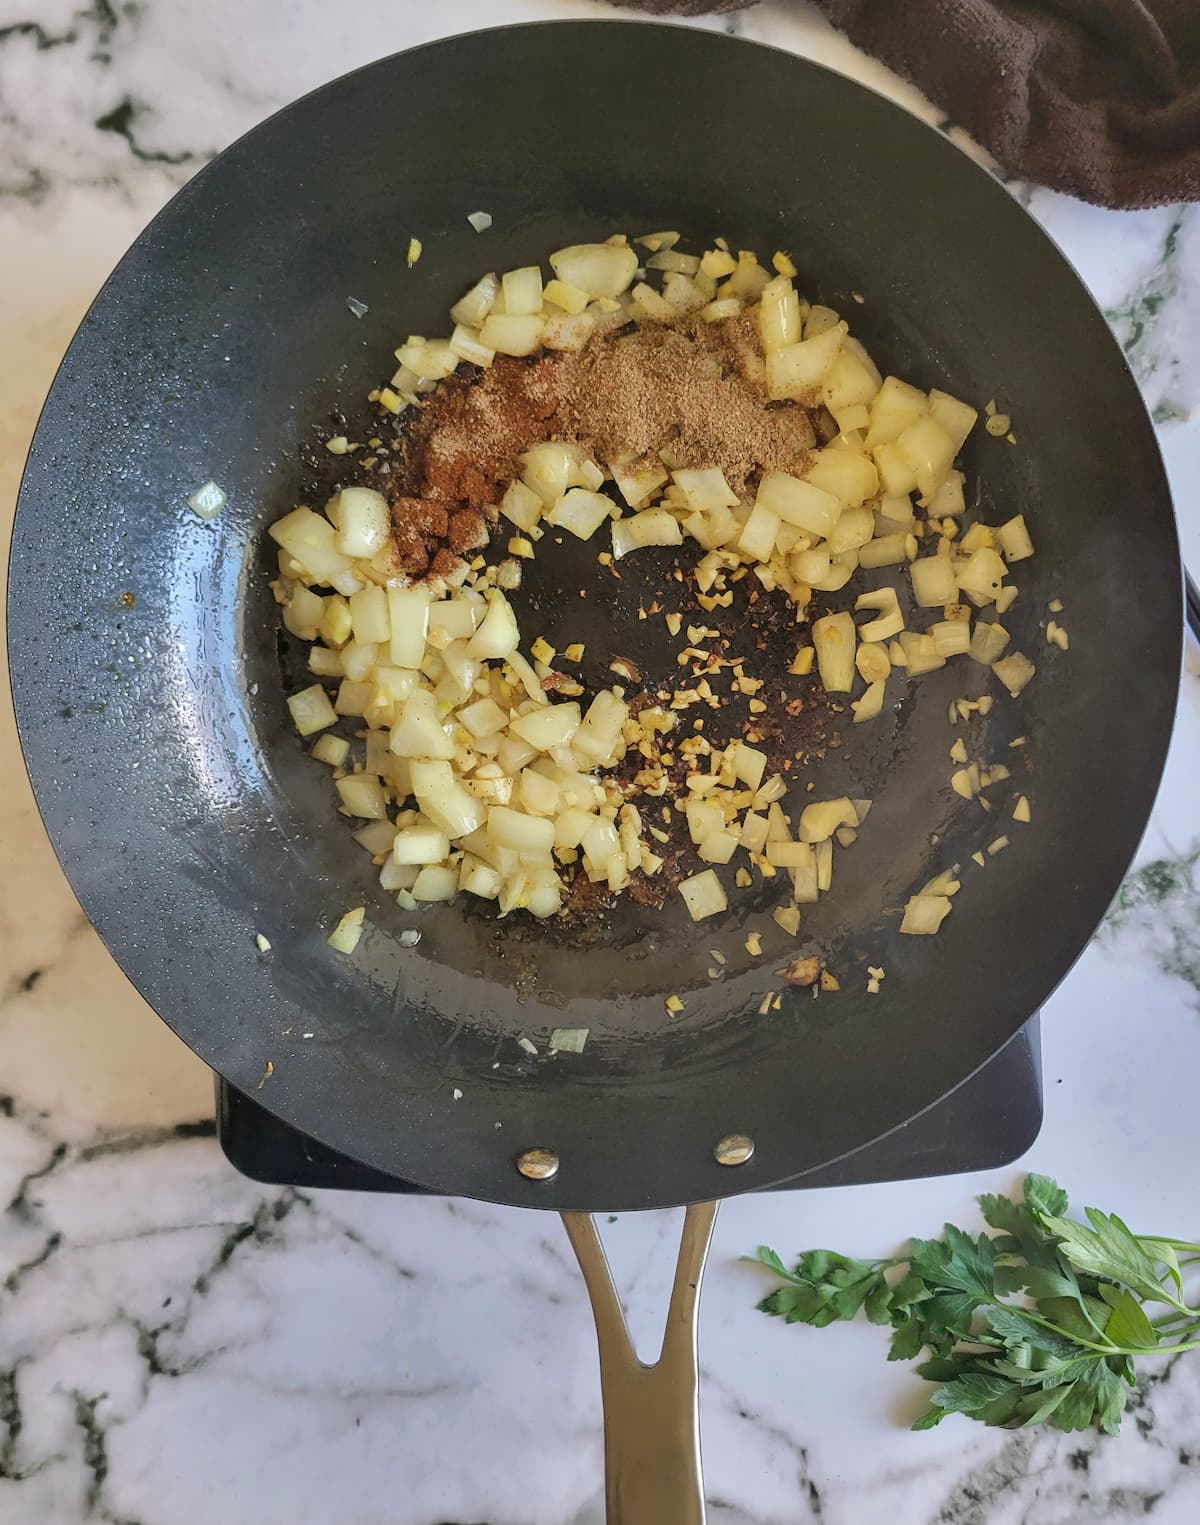 diced white onion, minced garlic, ginger and spices in a pan on a burner